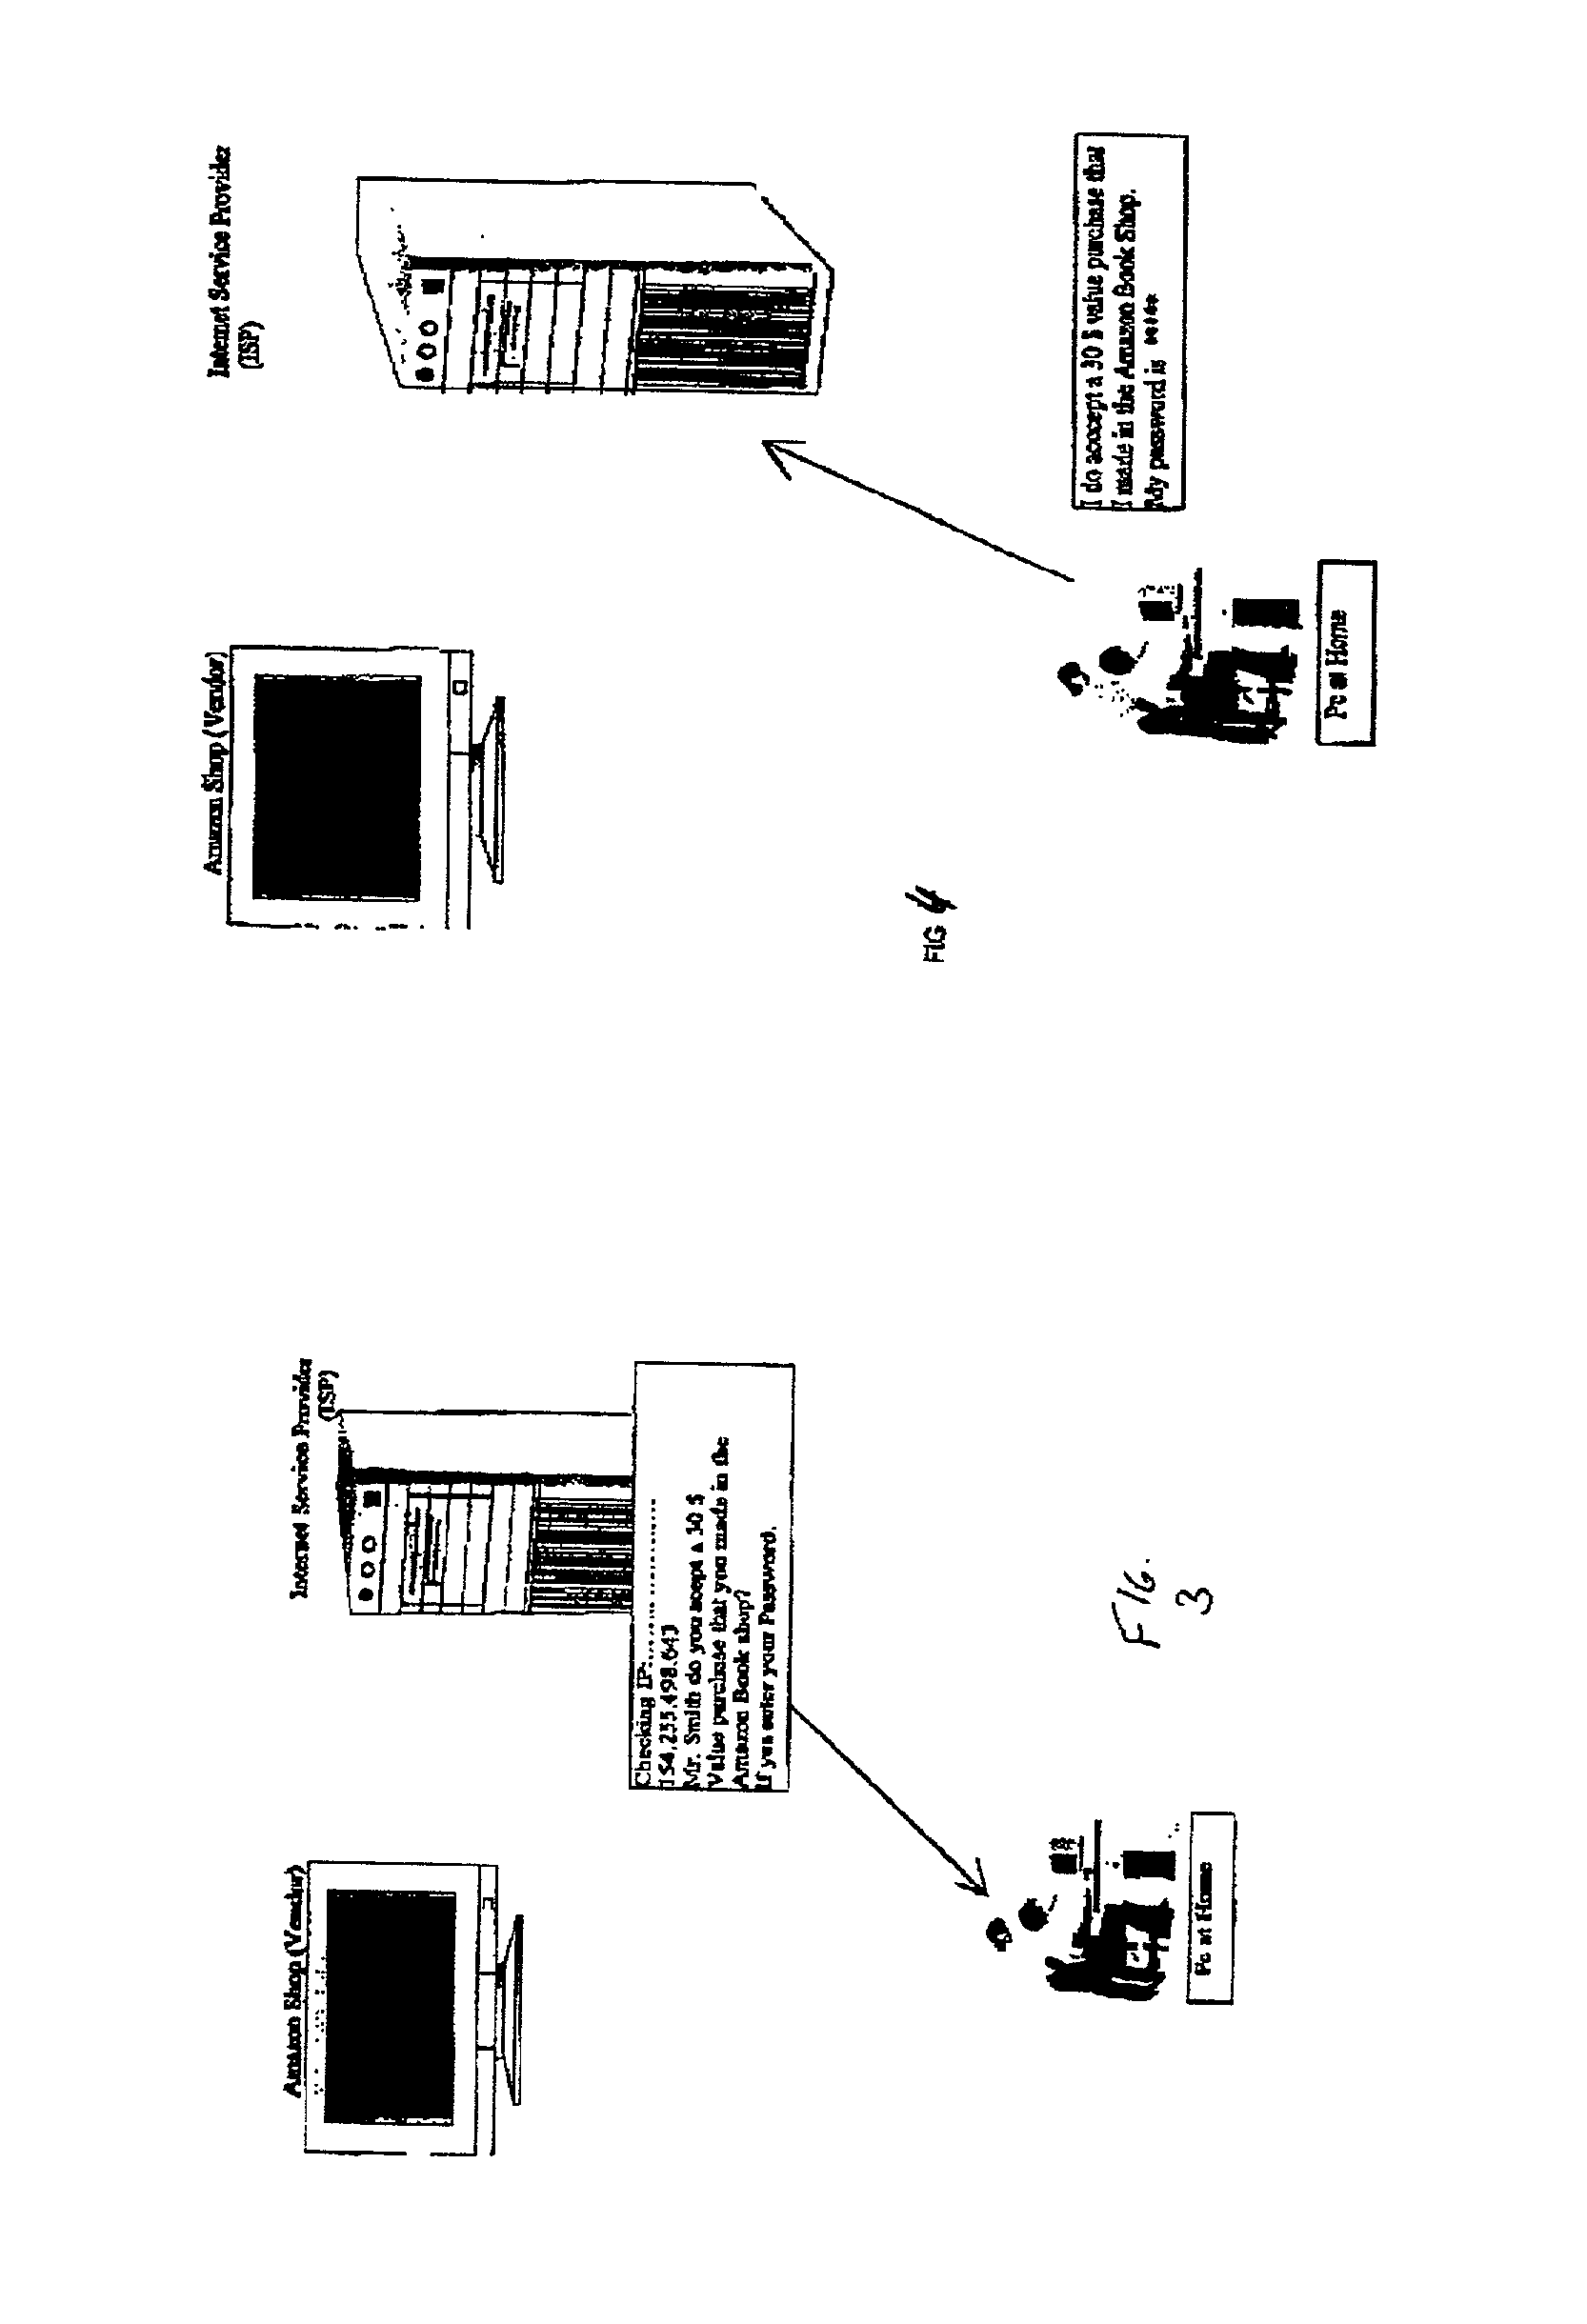 System and method for secure network purchasing